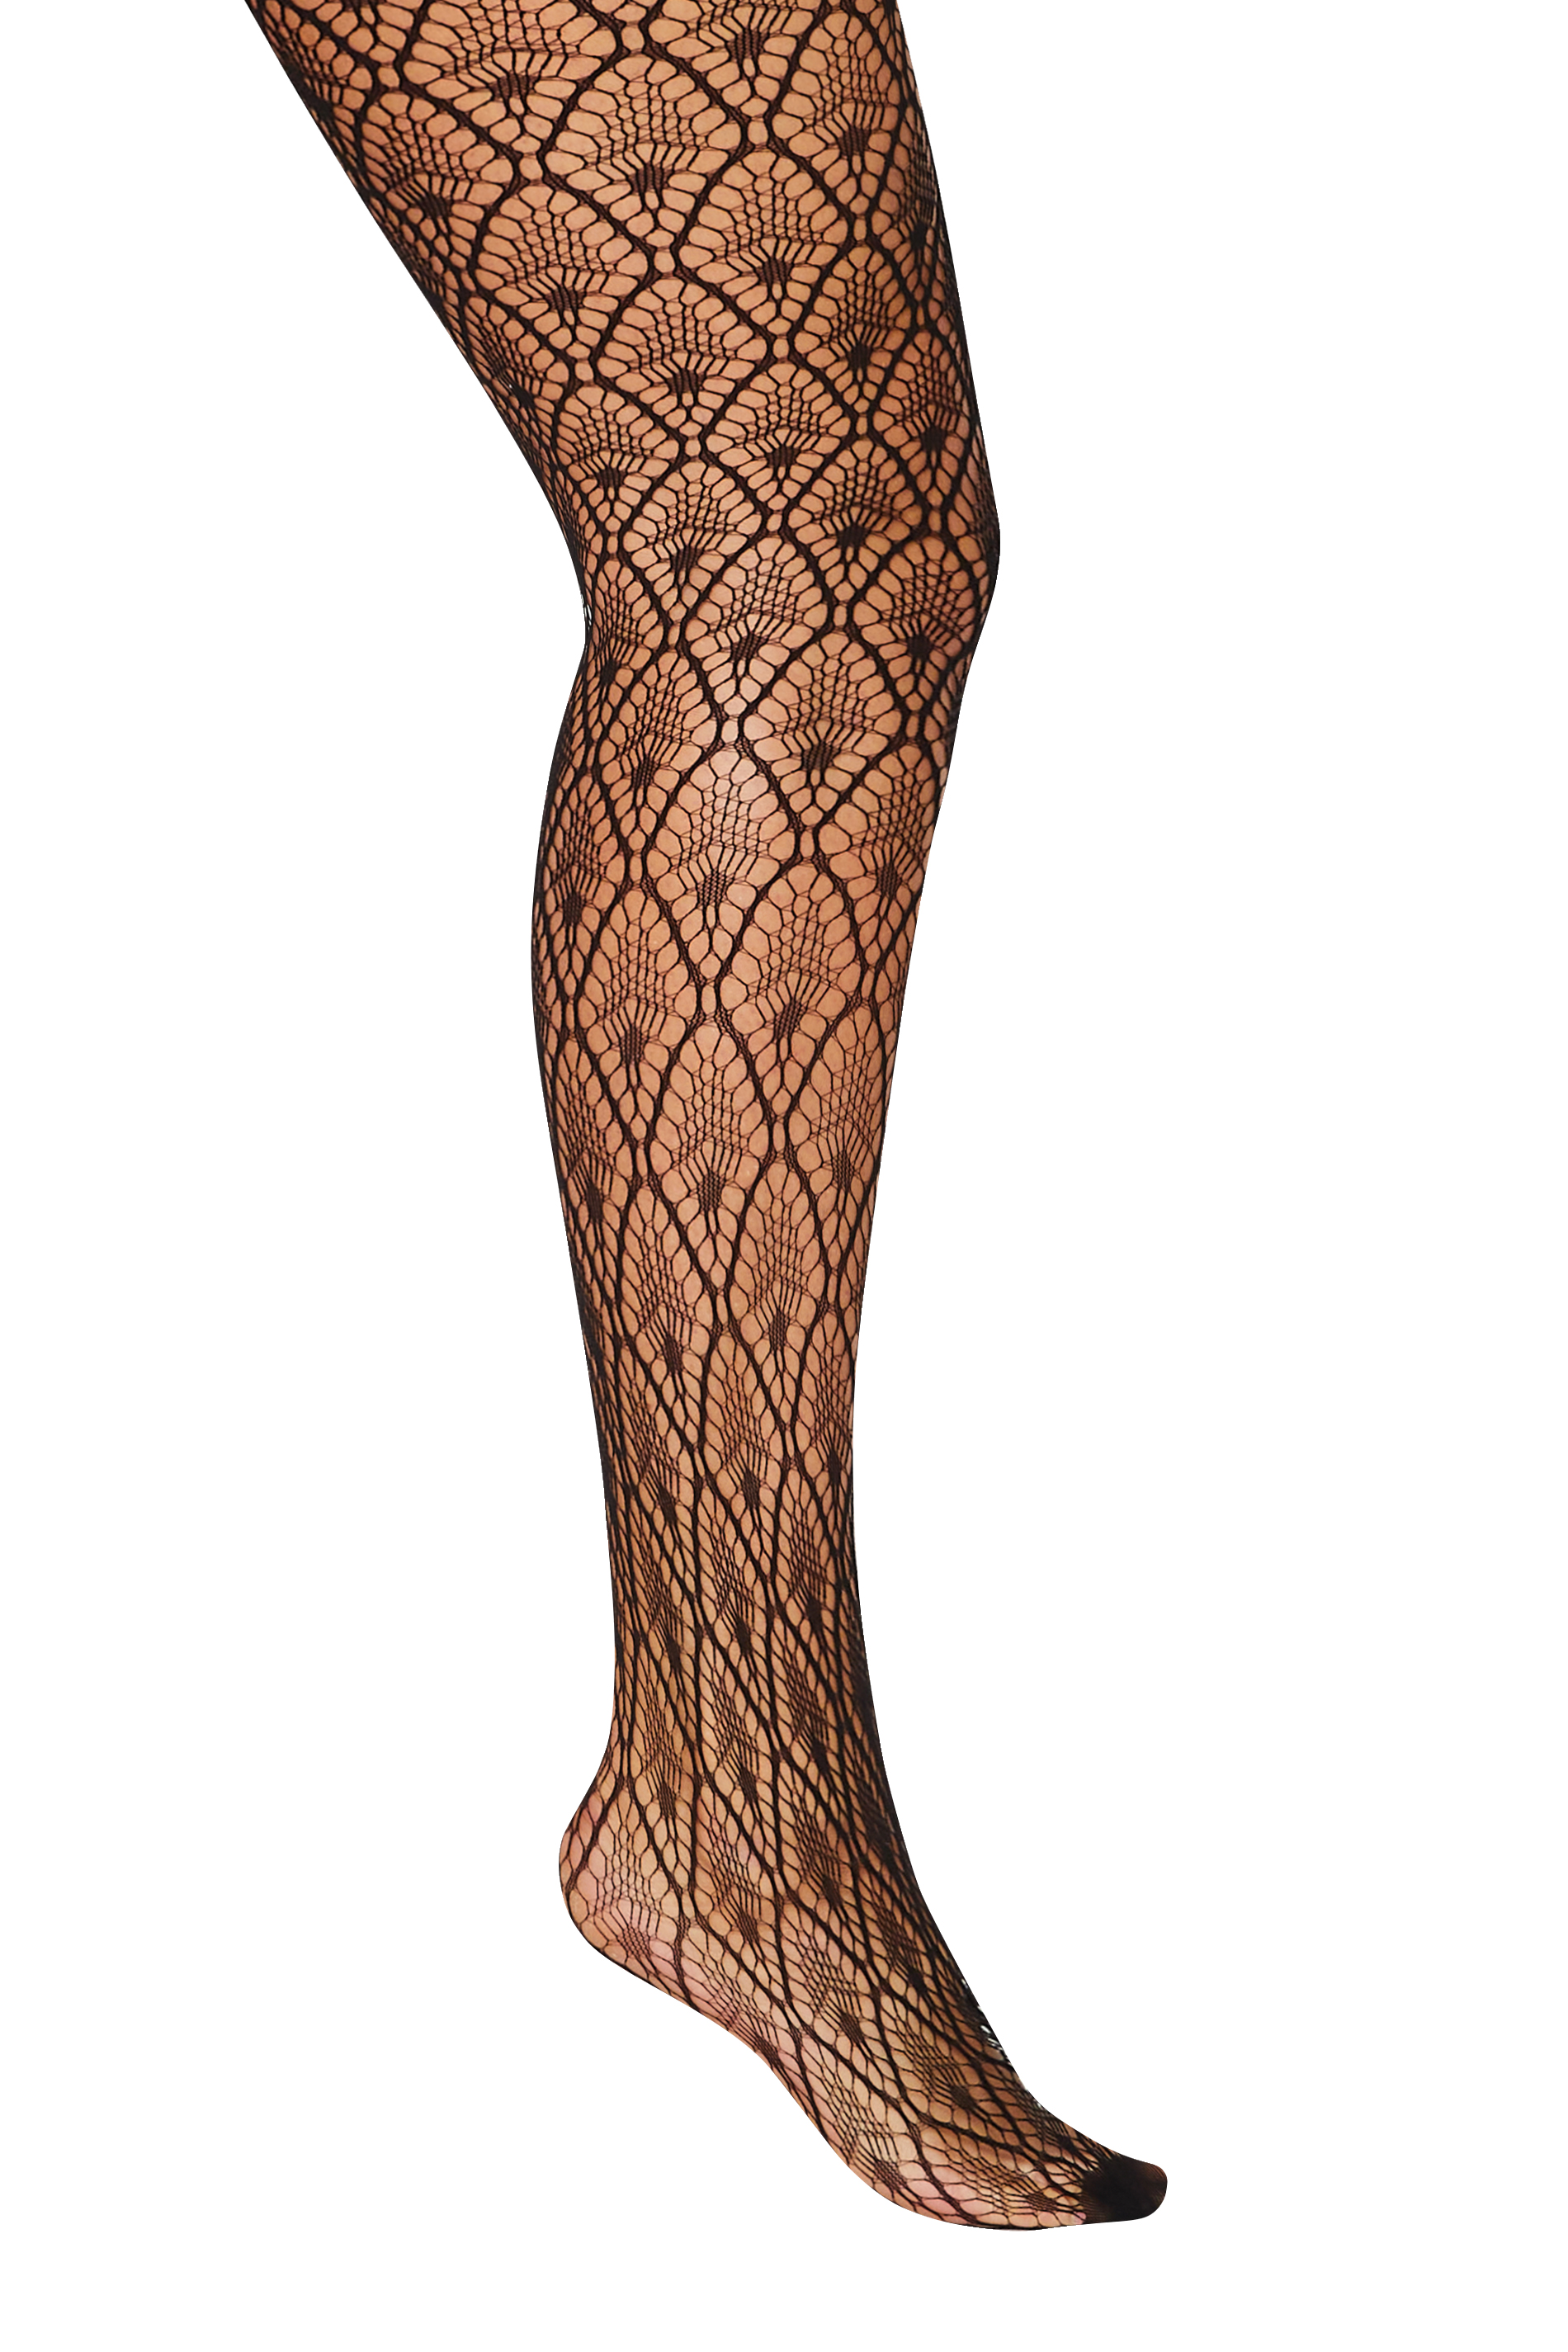 Black Peacock Feather Lace Tights | Yours Clothing  3